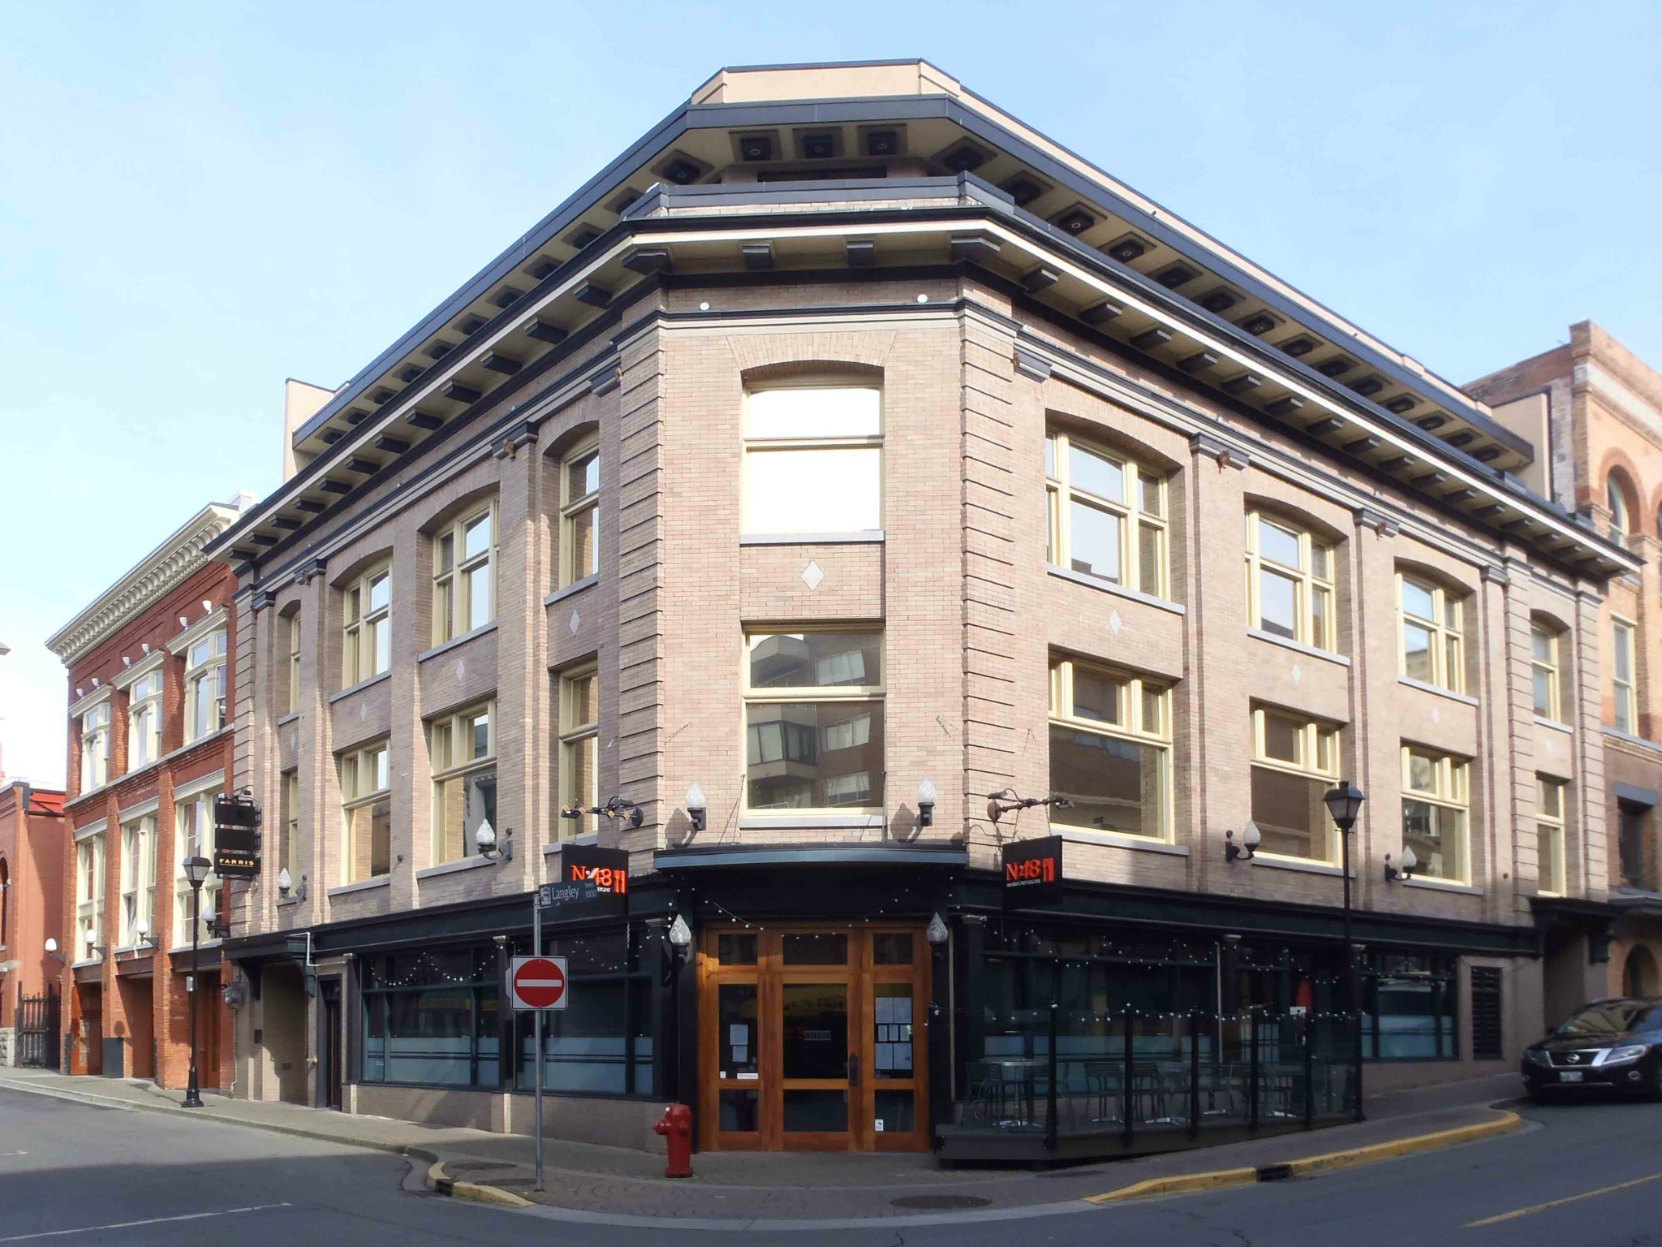 This building at the corner of Broughton Street and Langley Street was designed in 1909 by architect Francis Rattenbury as offices for the B.C. Land & Investment Company.